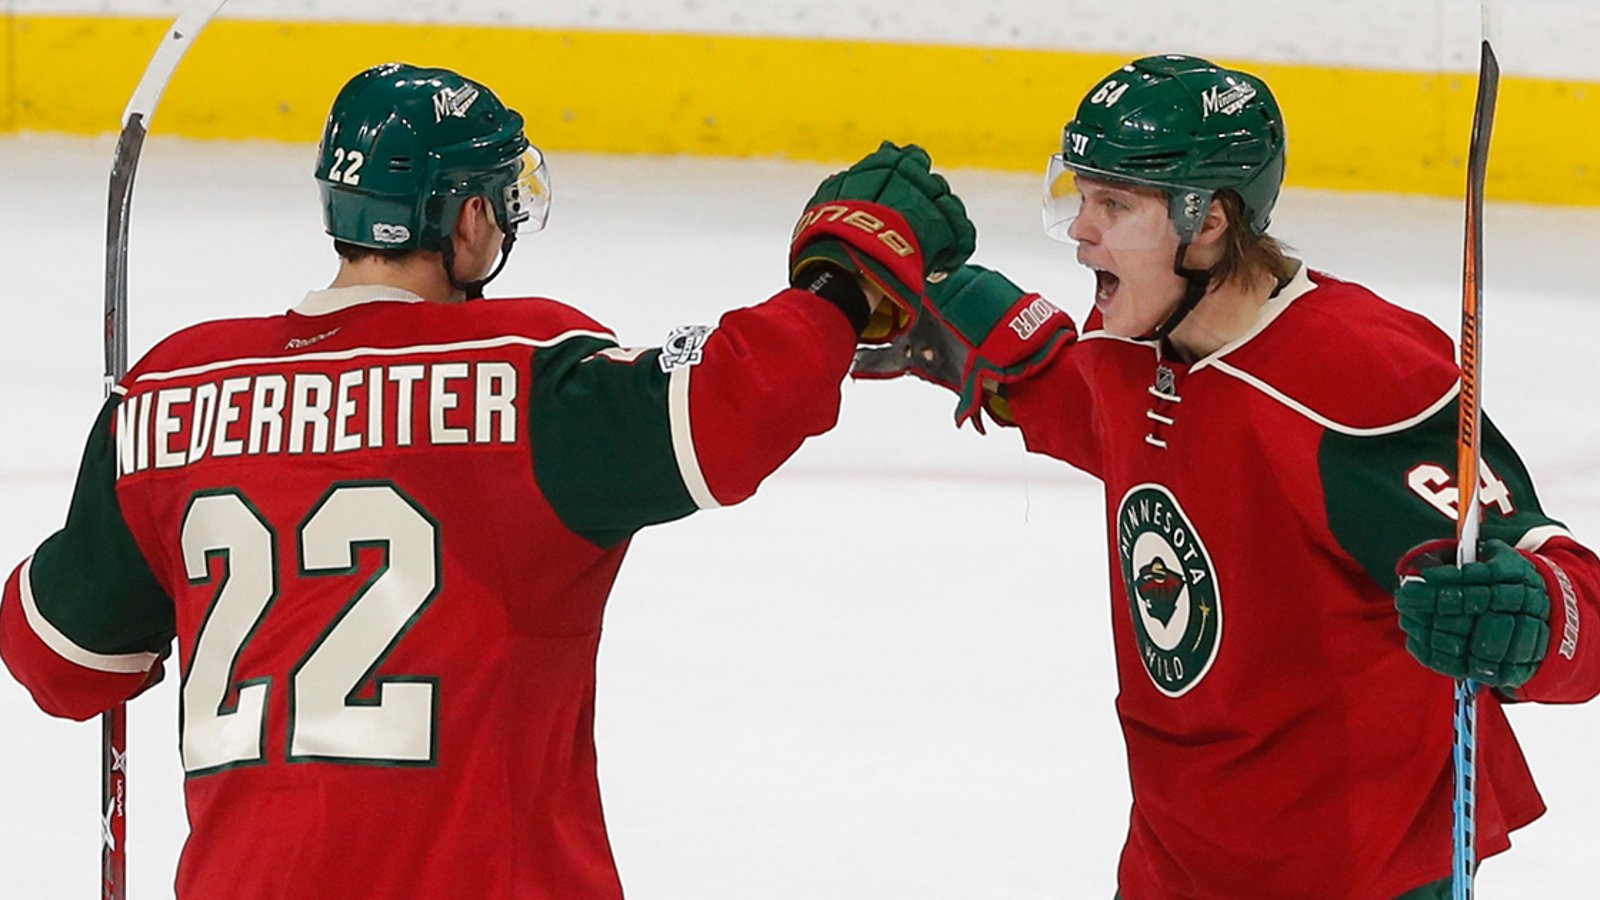 Injury Report: FINALLY some good news for the Wild